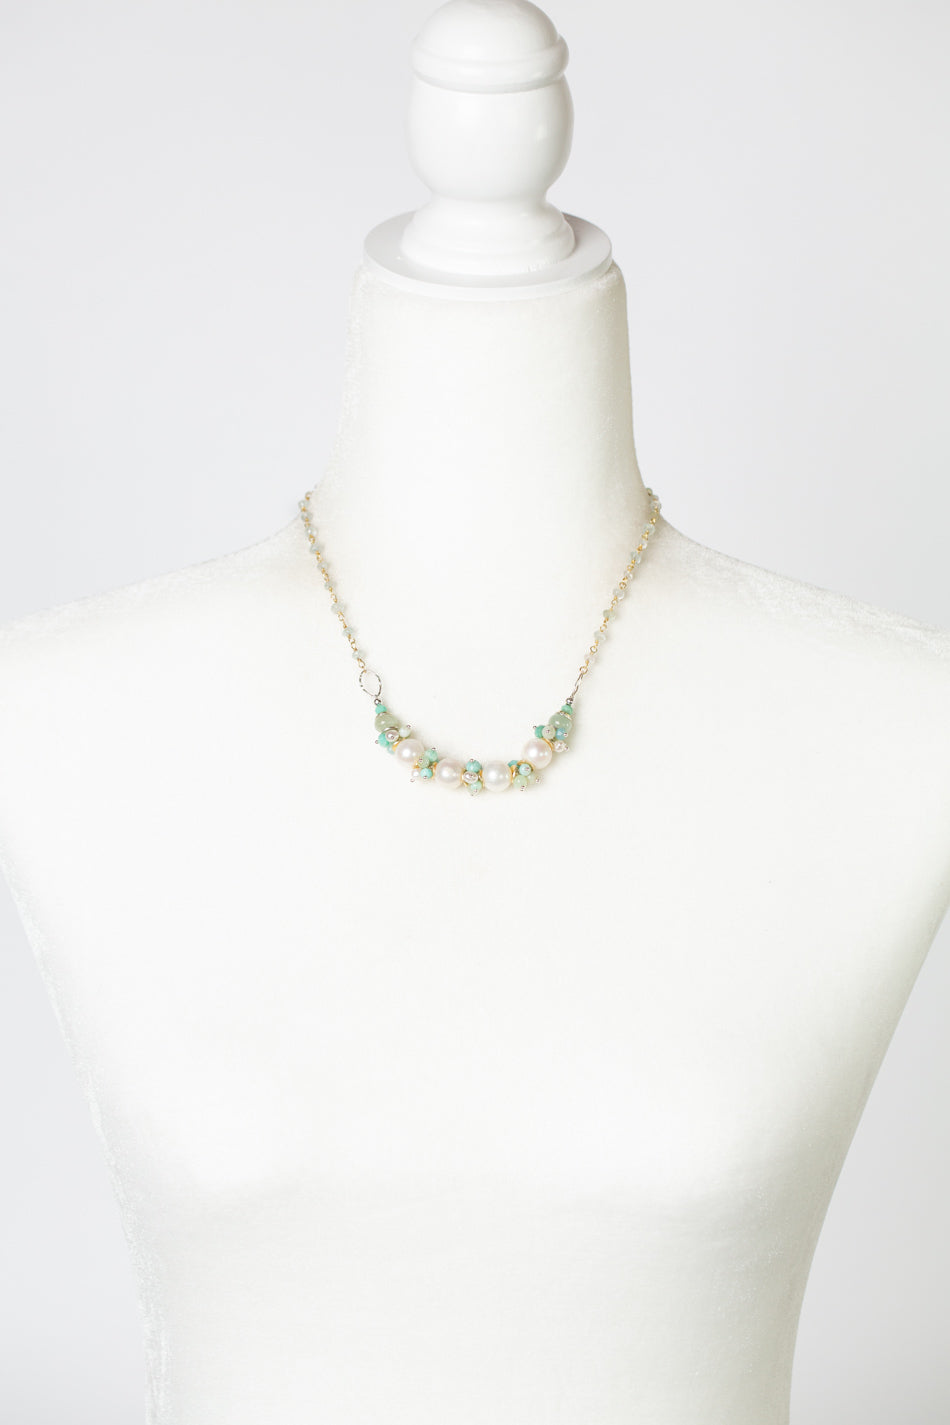 Serenity 17-19" Amazonite, Aquamarine With Freshwater Pearl Simple Necklace